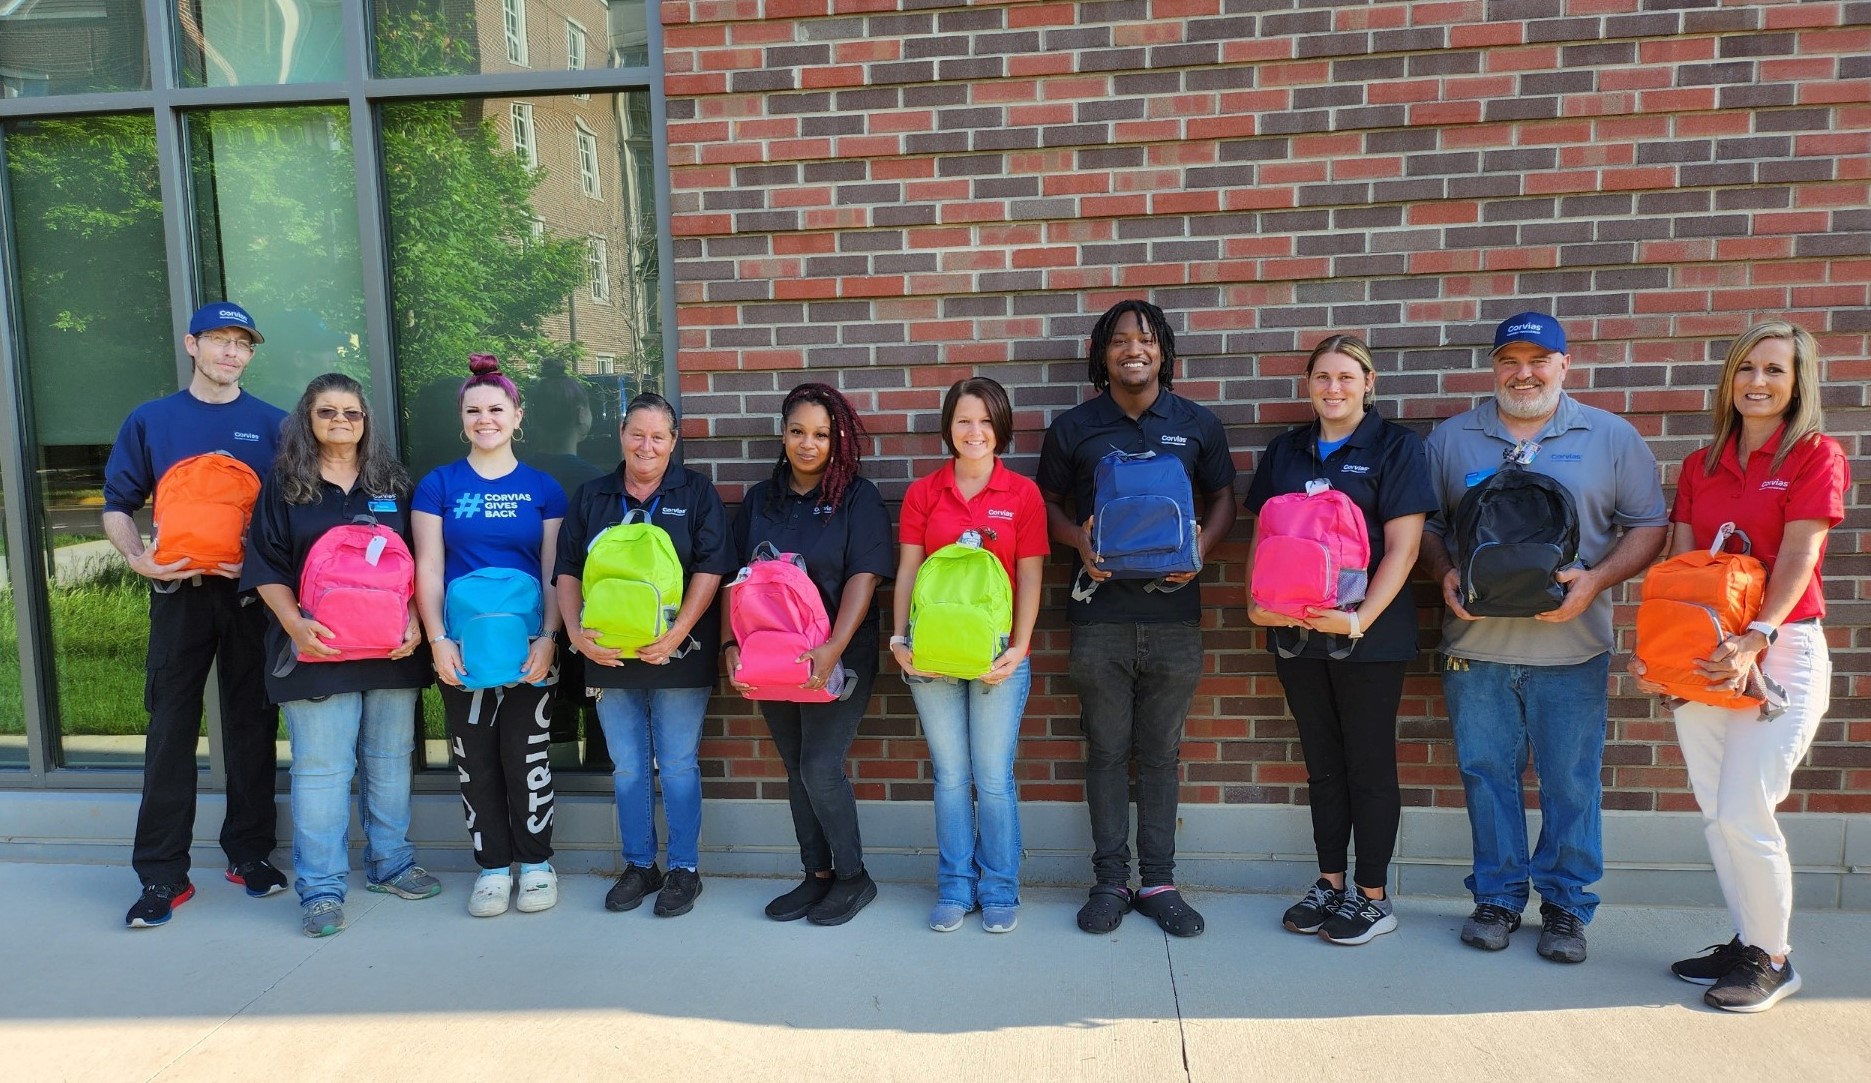 The Corvias team at Purdue University delivered backpacks stuffed with school supplies to a local elementary school.